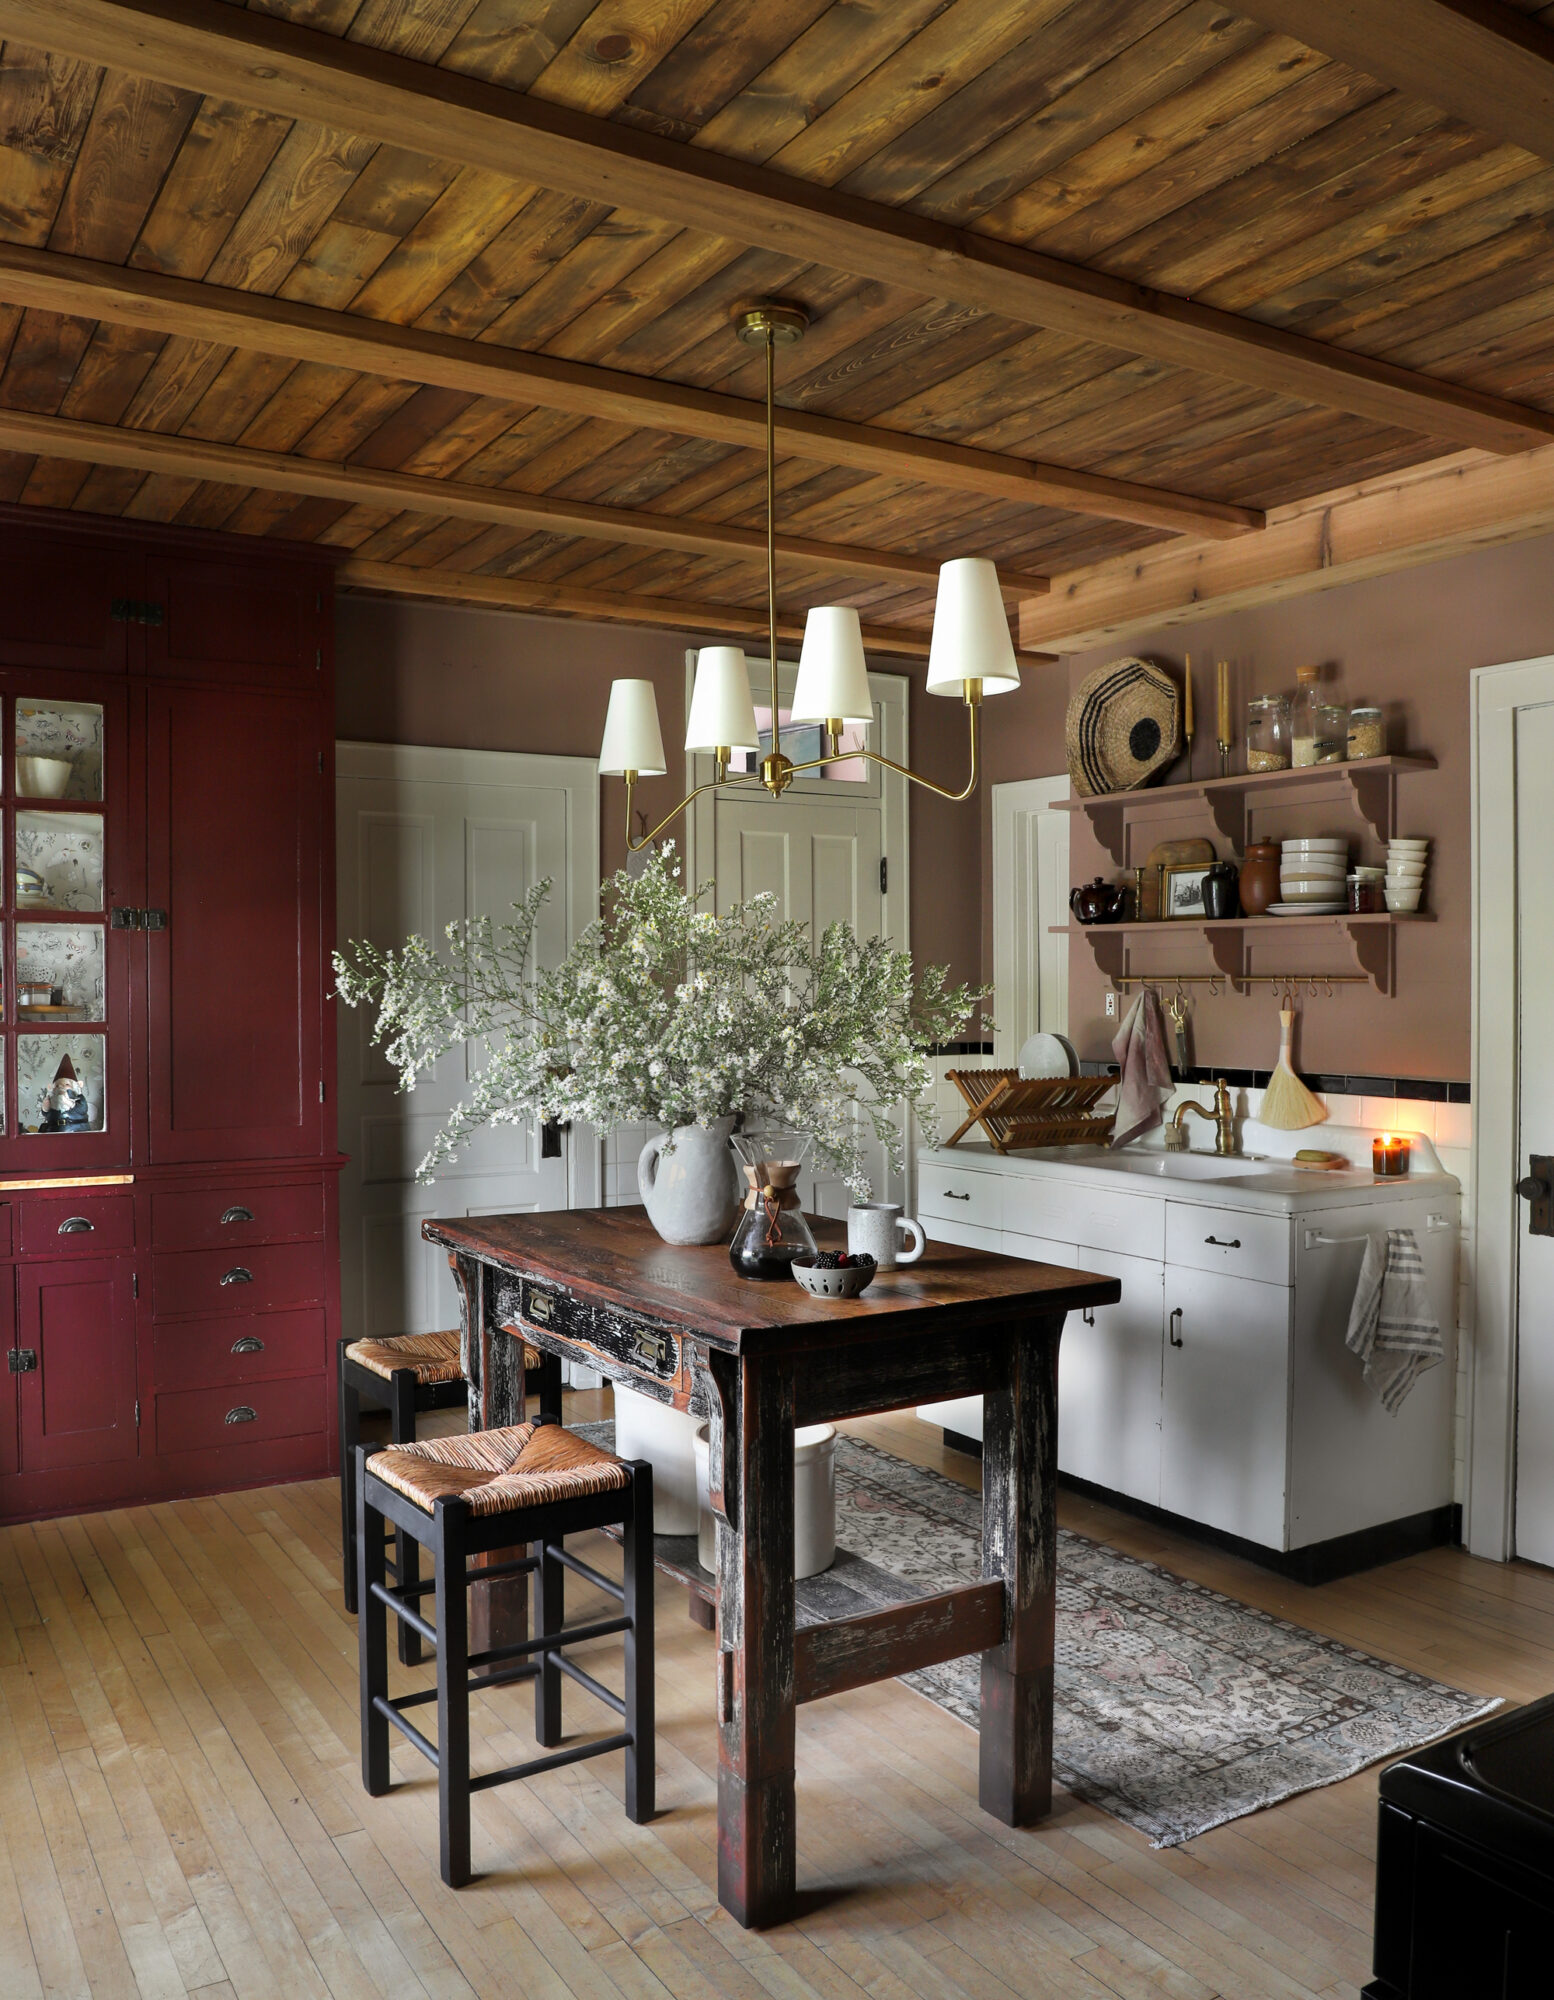 Rustic Kitchens: What Are They and What Makes Them So Amazing